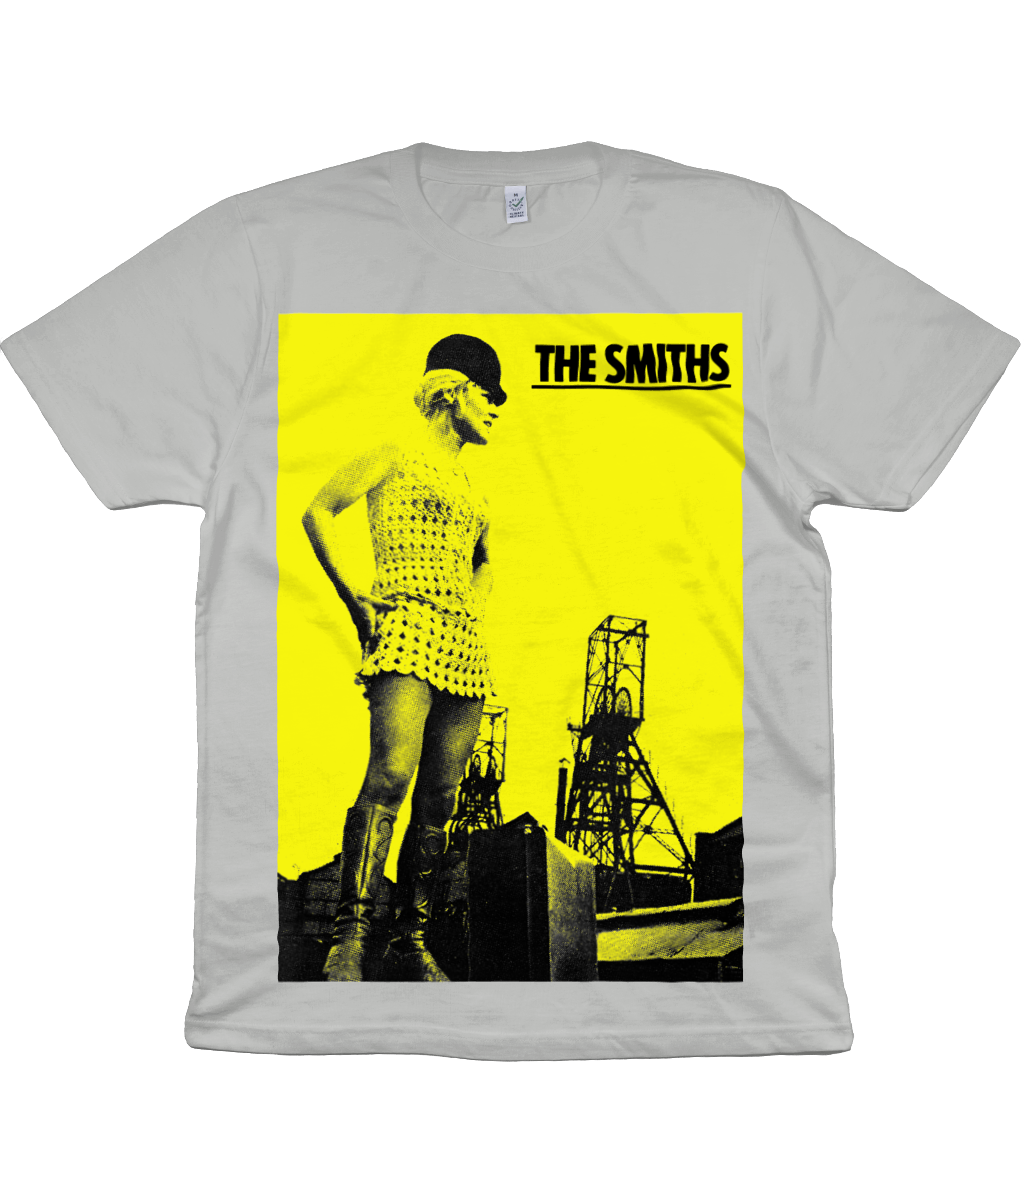 THE SMITHS - MEAT IS MURDER TOUR 1985